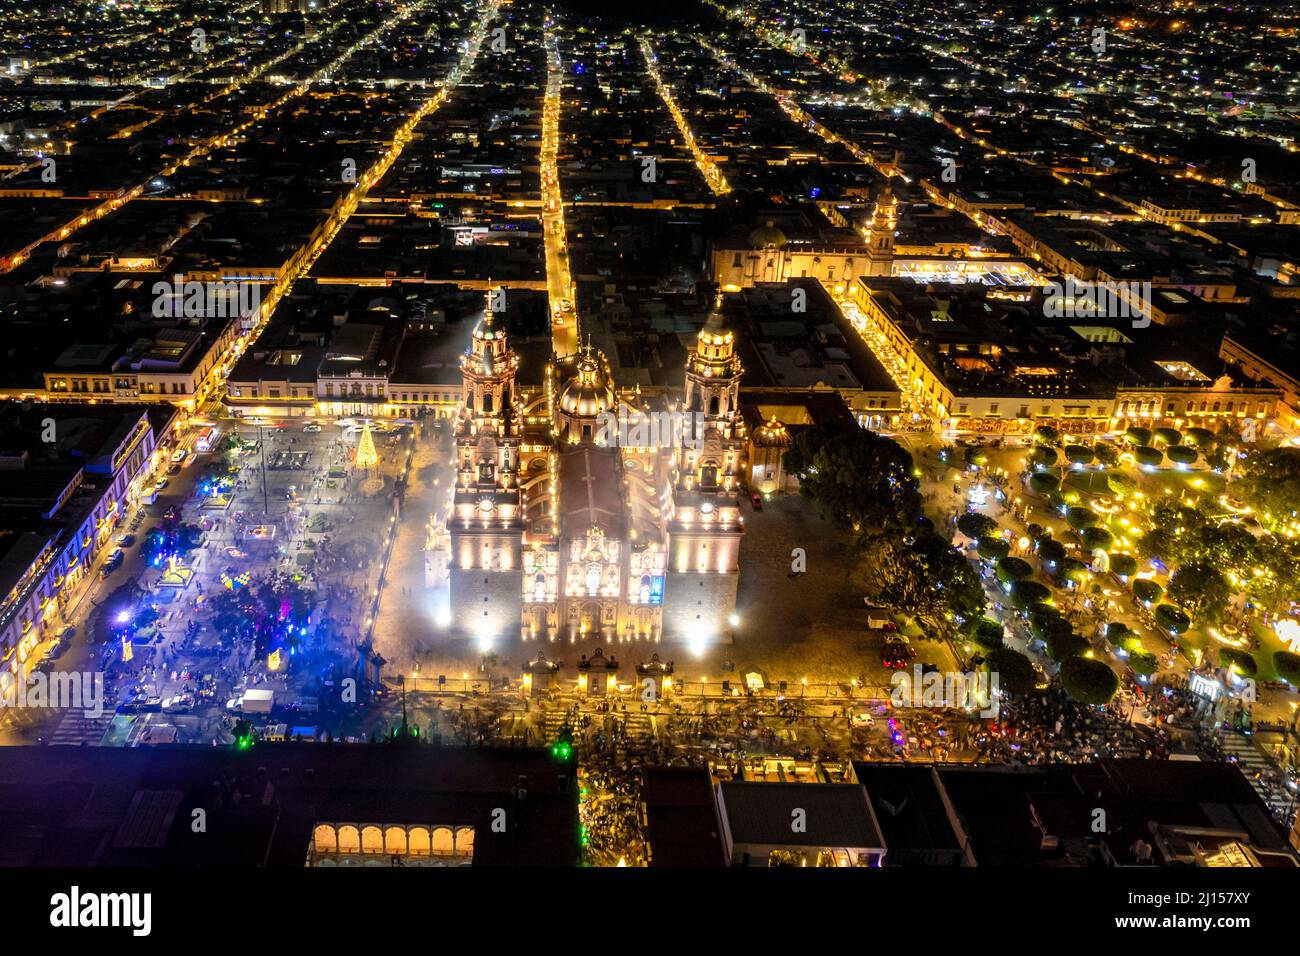 Aerial night view of the illuminated cathedral and plazas of Morelia, Michoacan, Mexico. Stock Photo